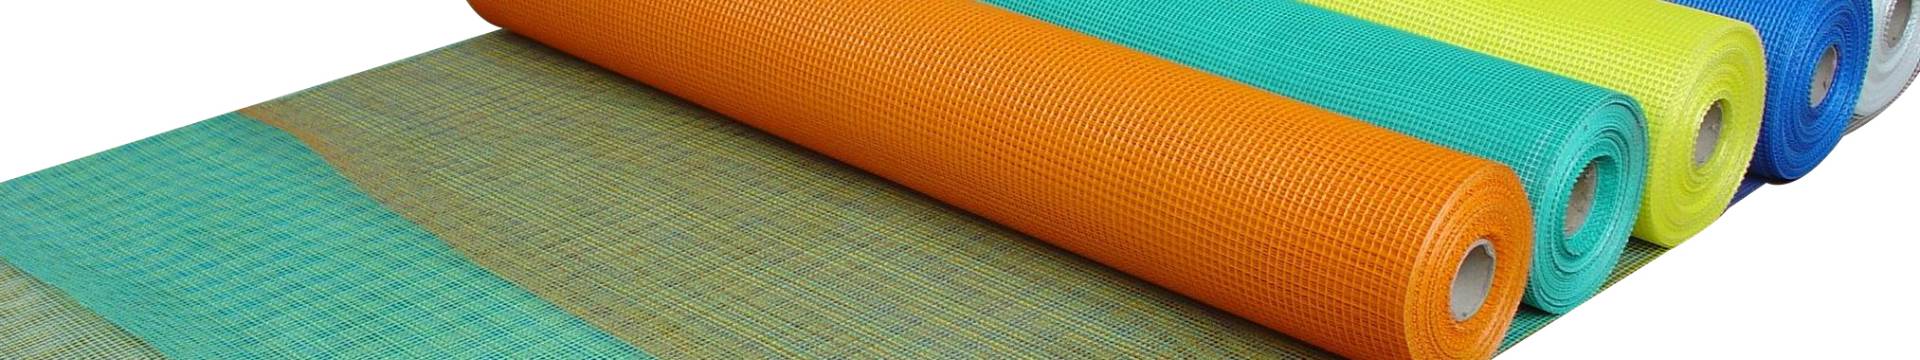 There are five rolls of fiberglass mesh with various colors.